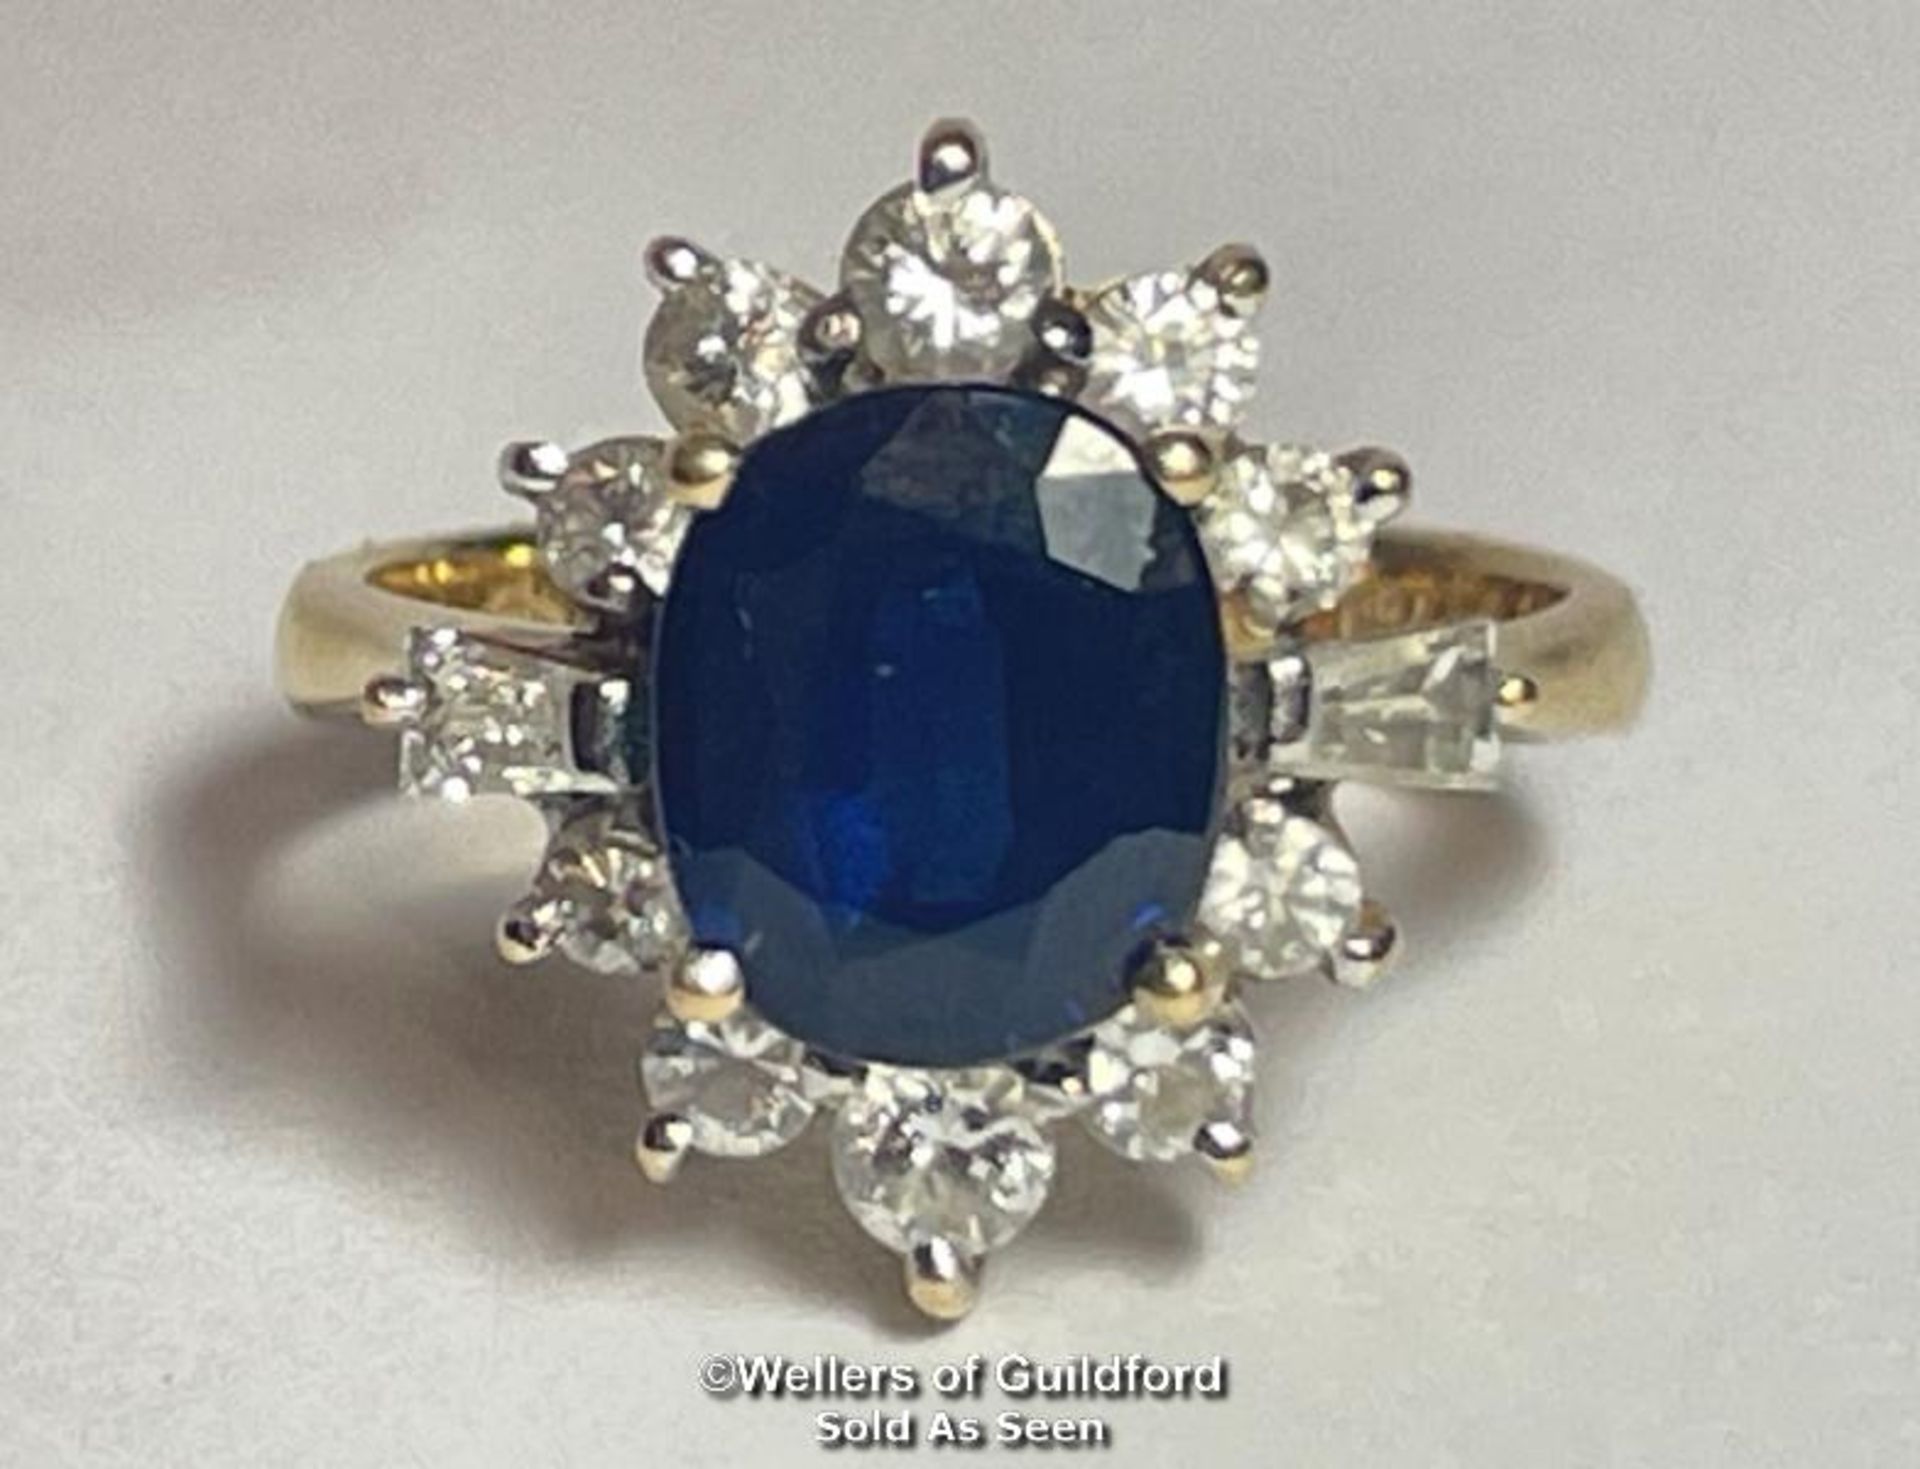 A SAPHIRE AND DIAMOND OVAL CLUSTER RING, THE SAPHIRE MEASURES APPROX 8.4 X 7.1 X 4.1MM, ESTIMATED